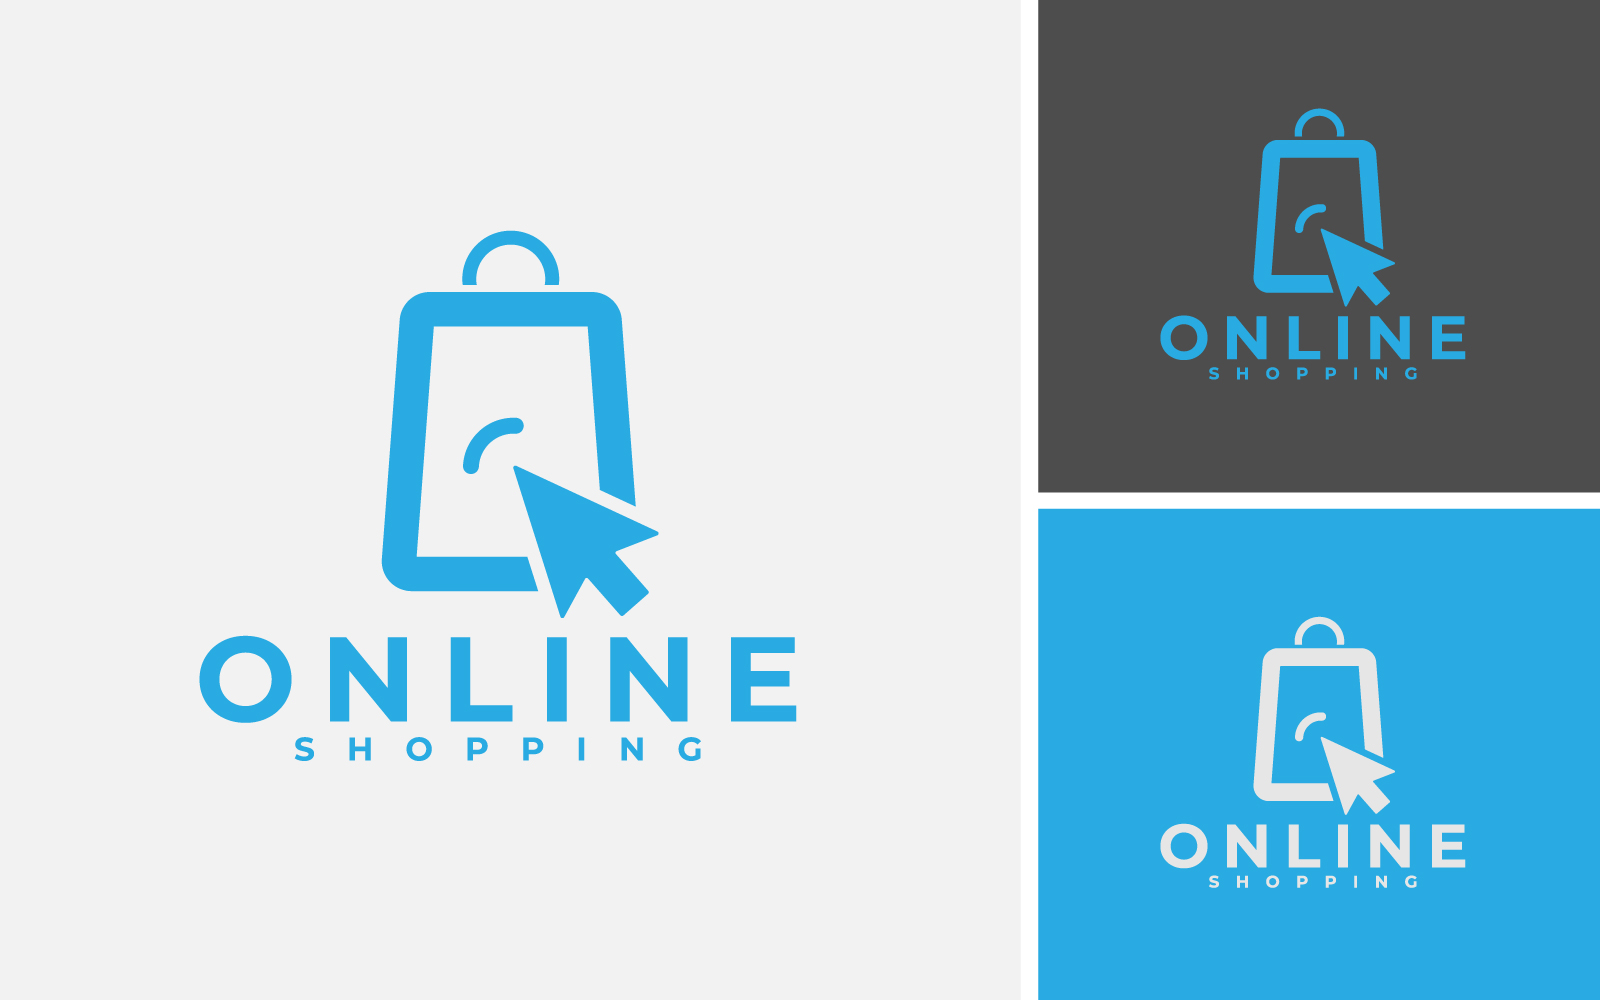 Online Shopping Logo Design With Mouse Cursor And Bag For E-Commerce Web